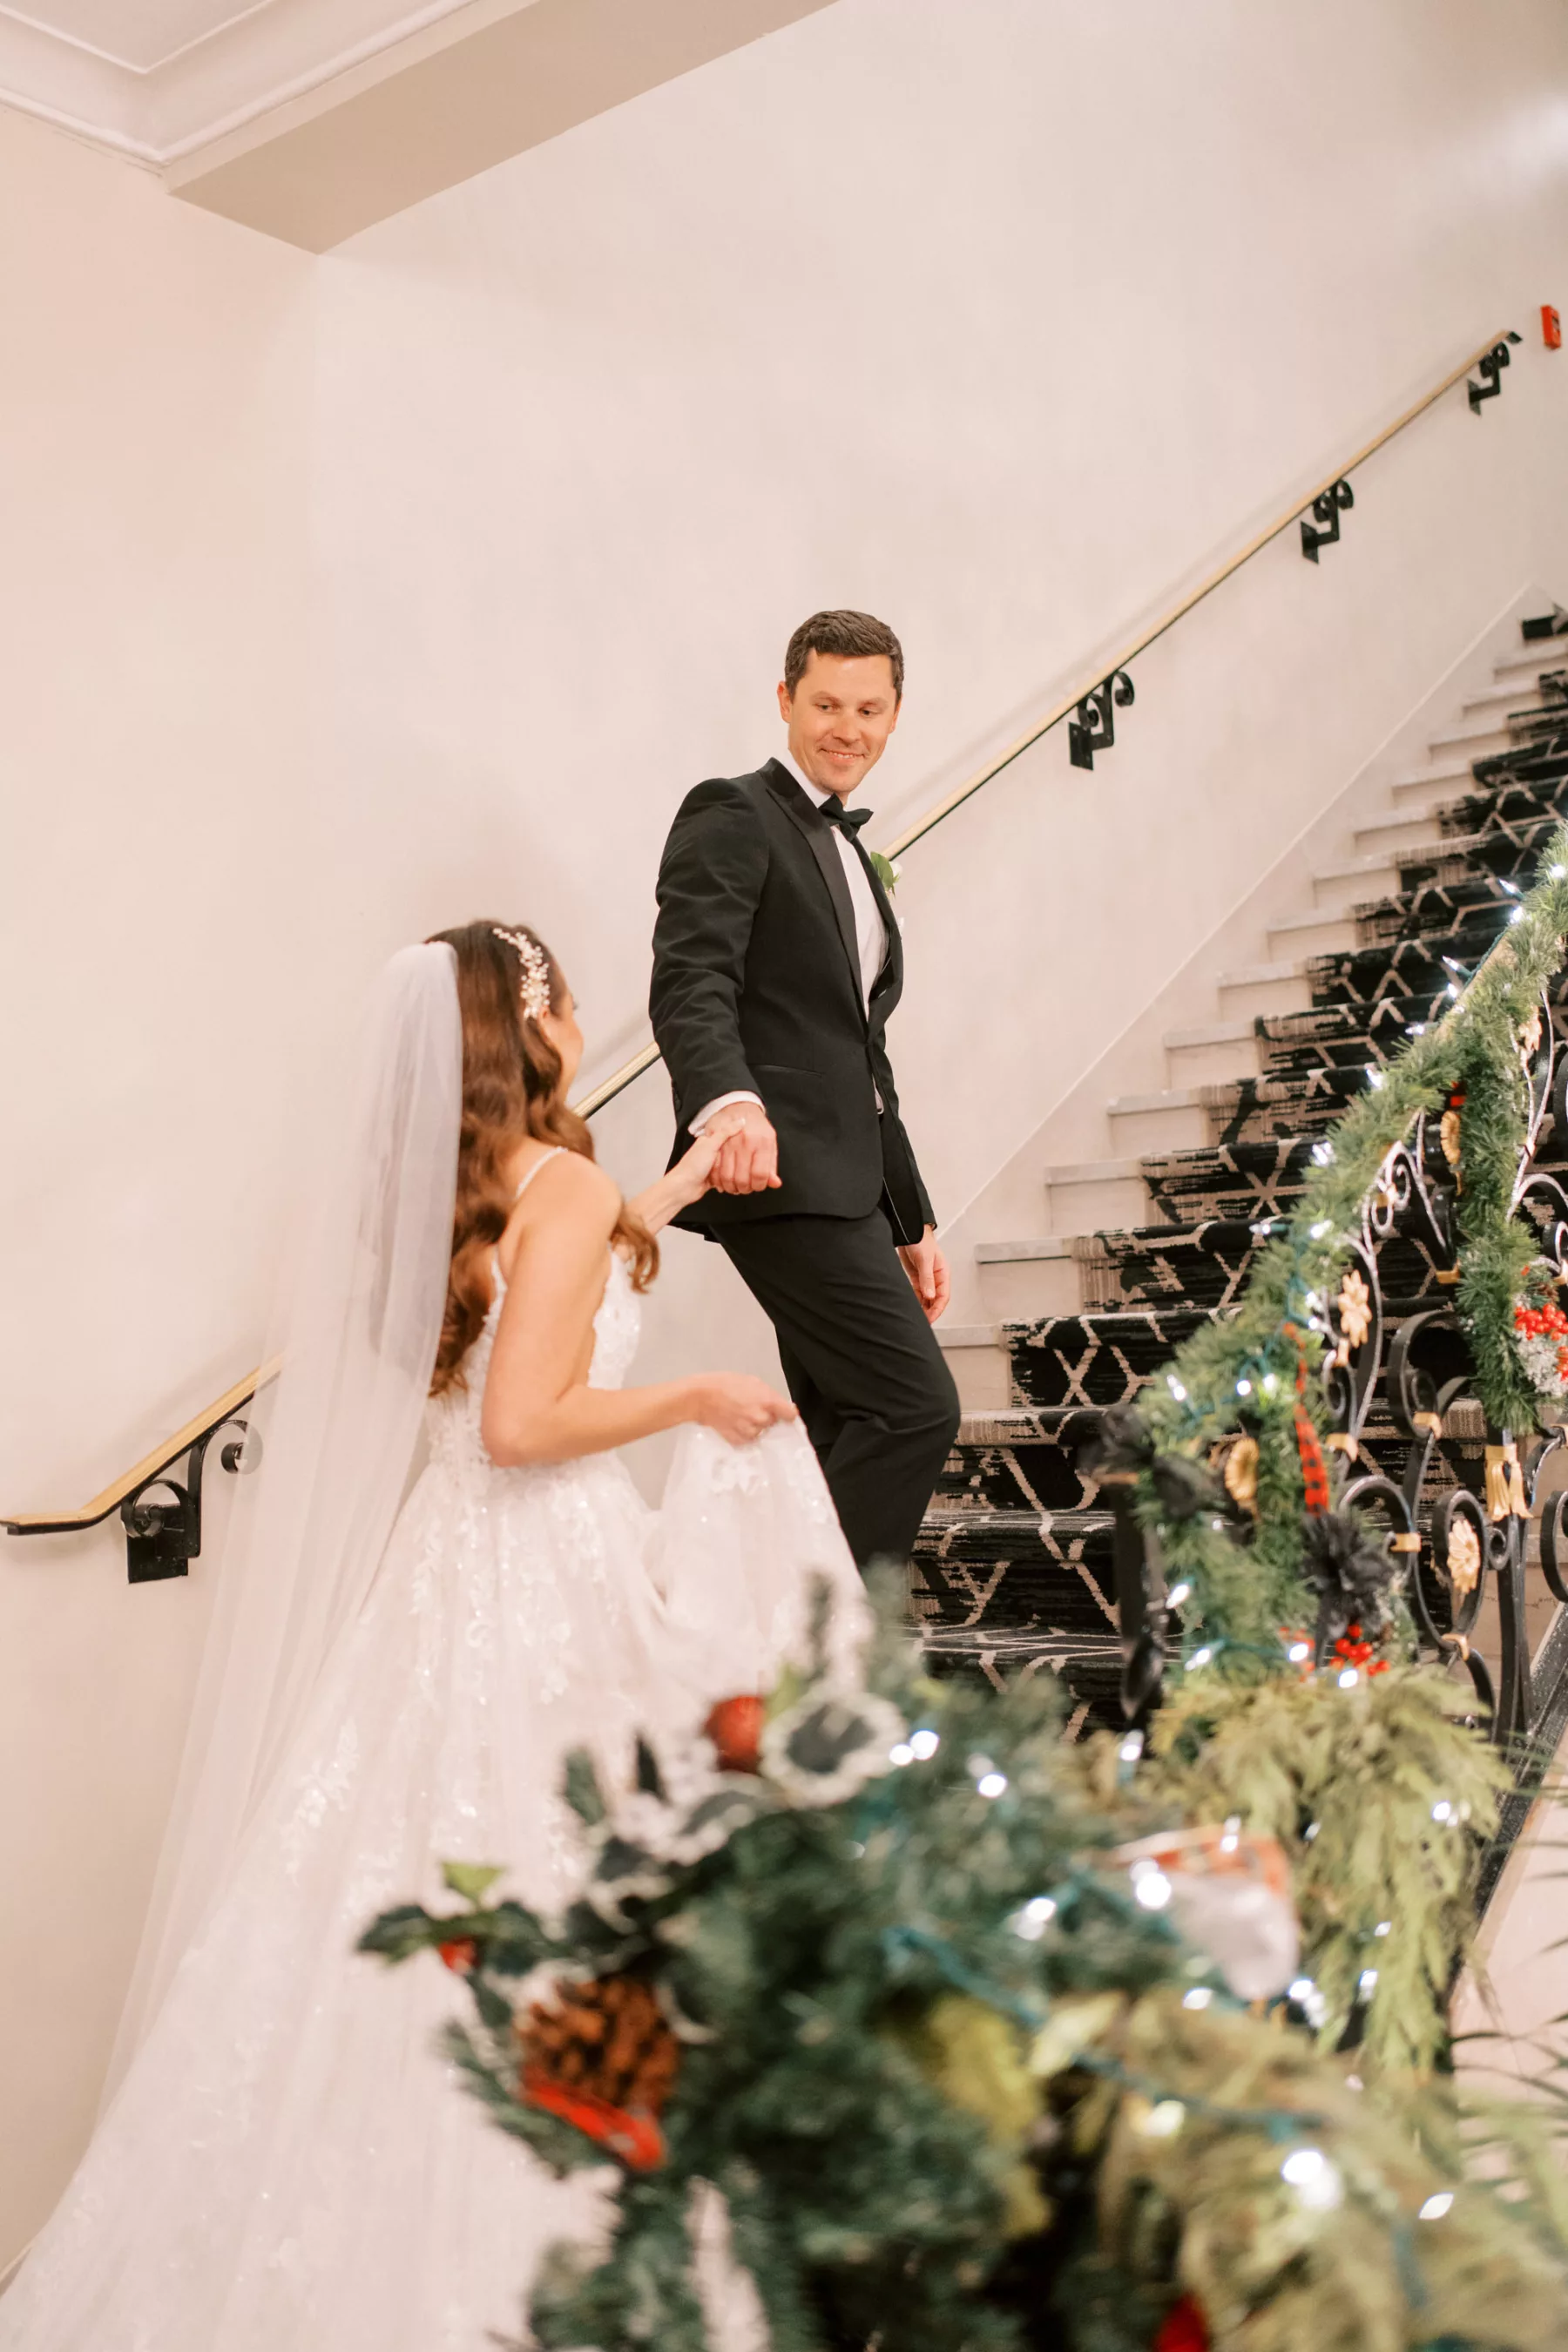 Bride and Groom Walking Up the Stairs Wedding Portrait | Tampa Bay Photographer Eddy Almaguer Photography